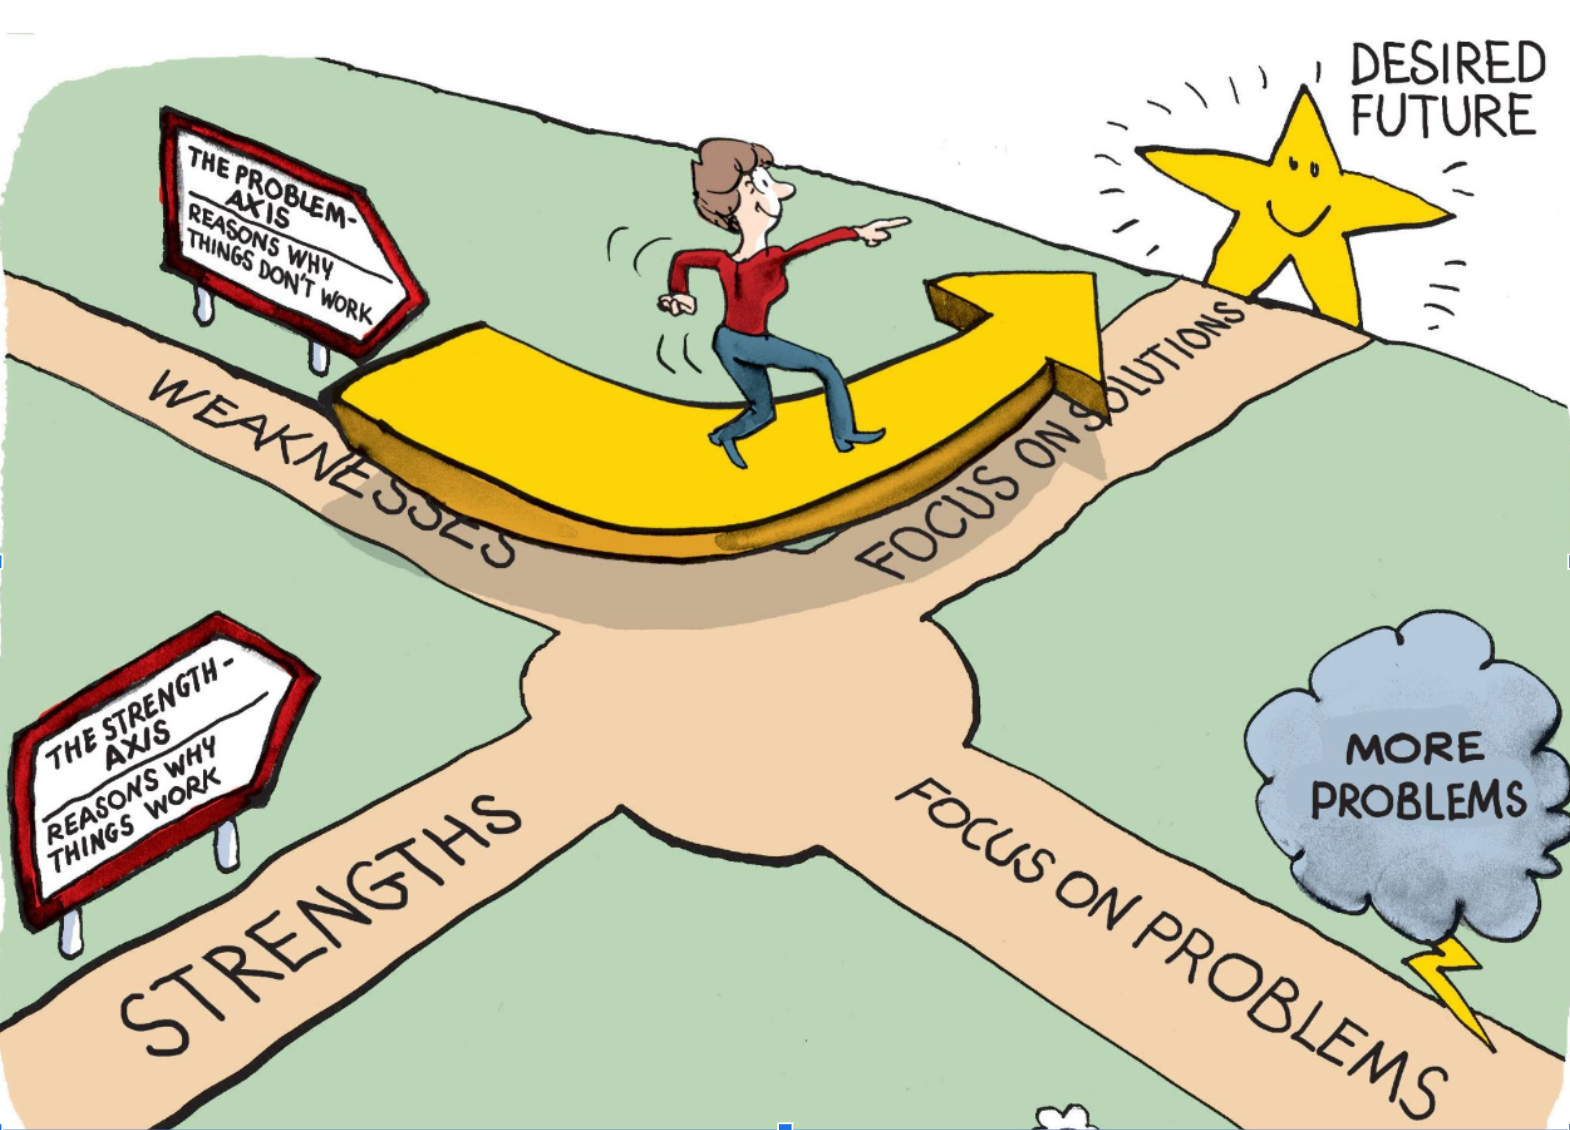 Illustration showing a person at a crossroad with several options for Solutions-Focused Conversations. The person heads down the Focus-on-solutions path.